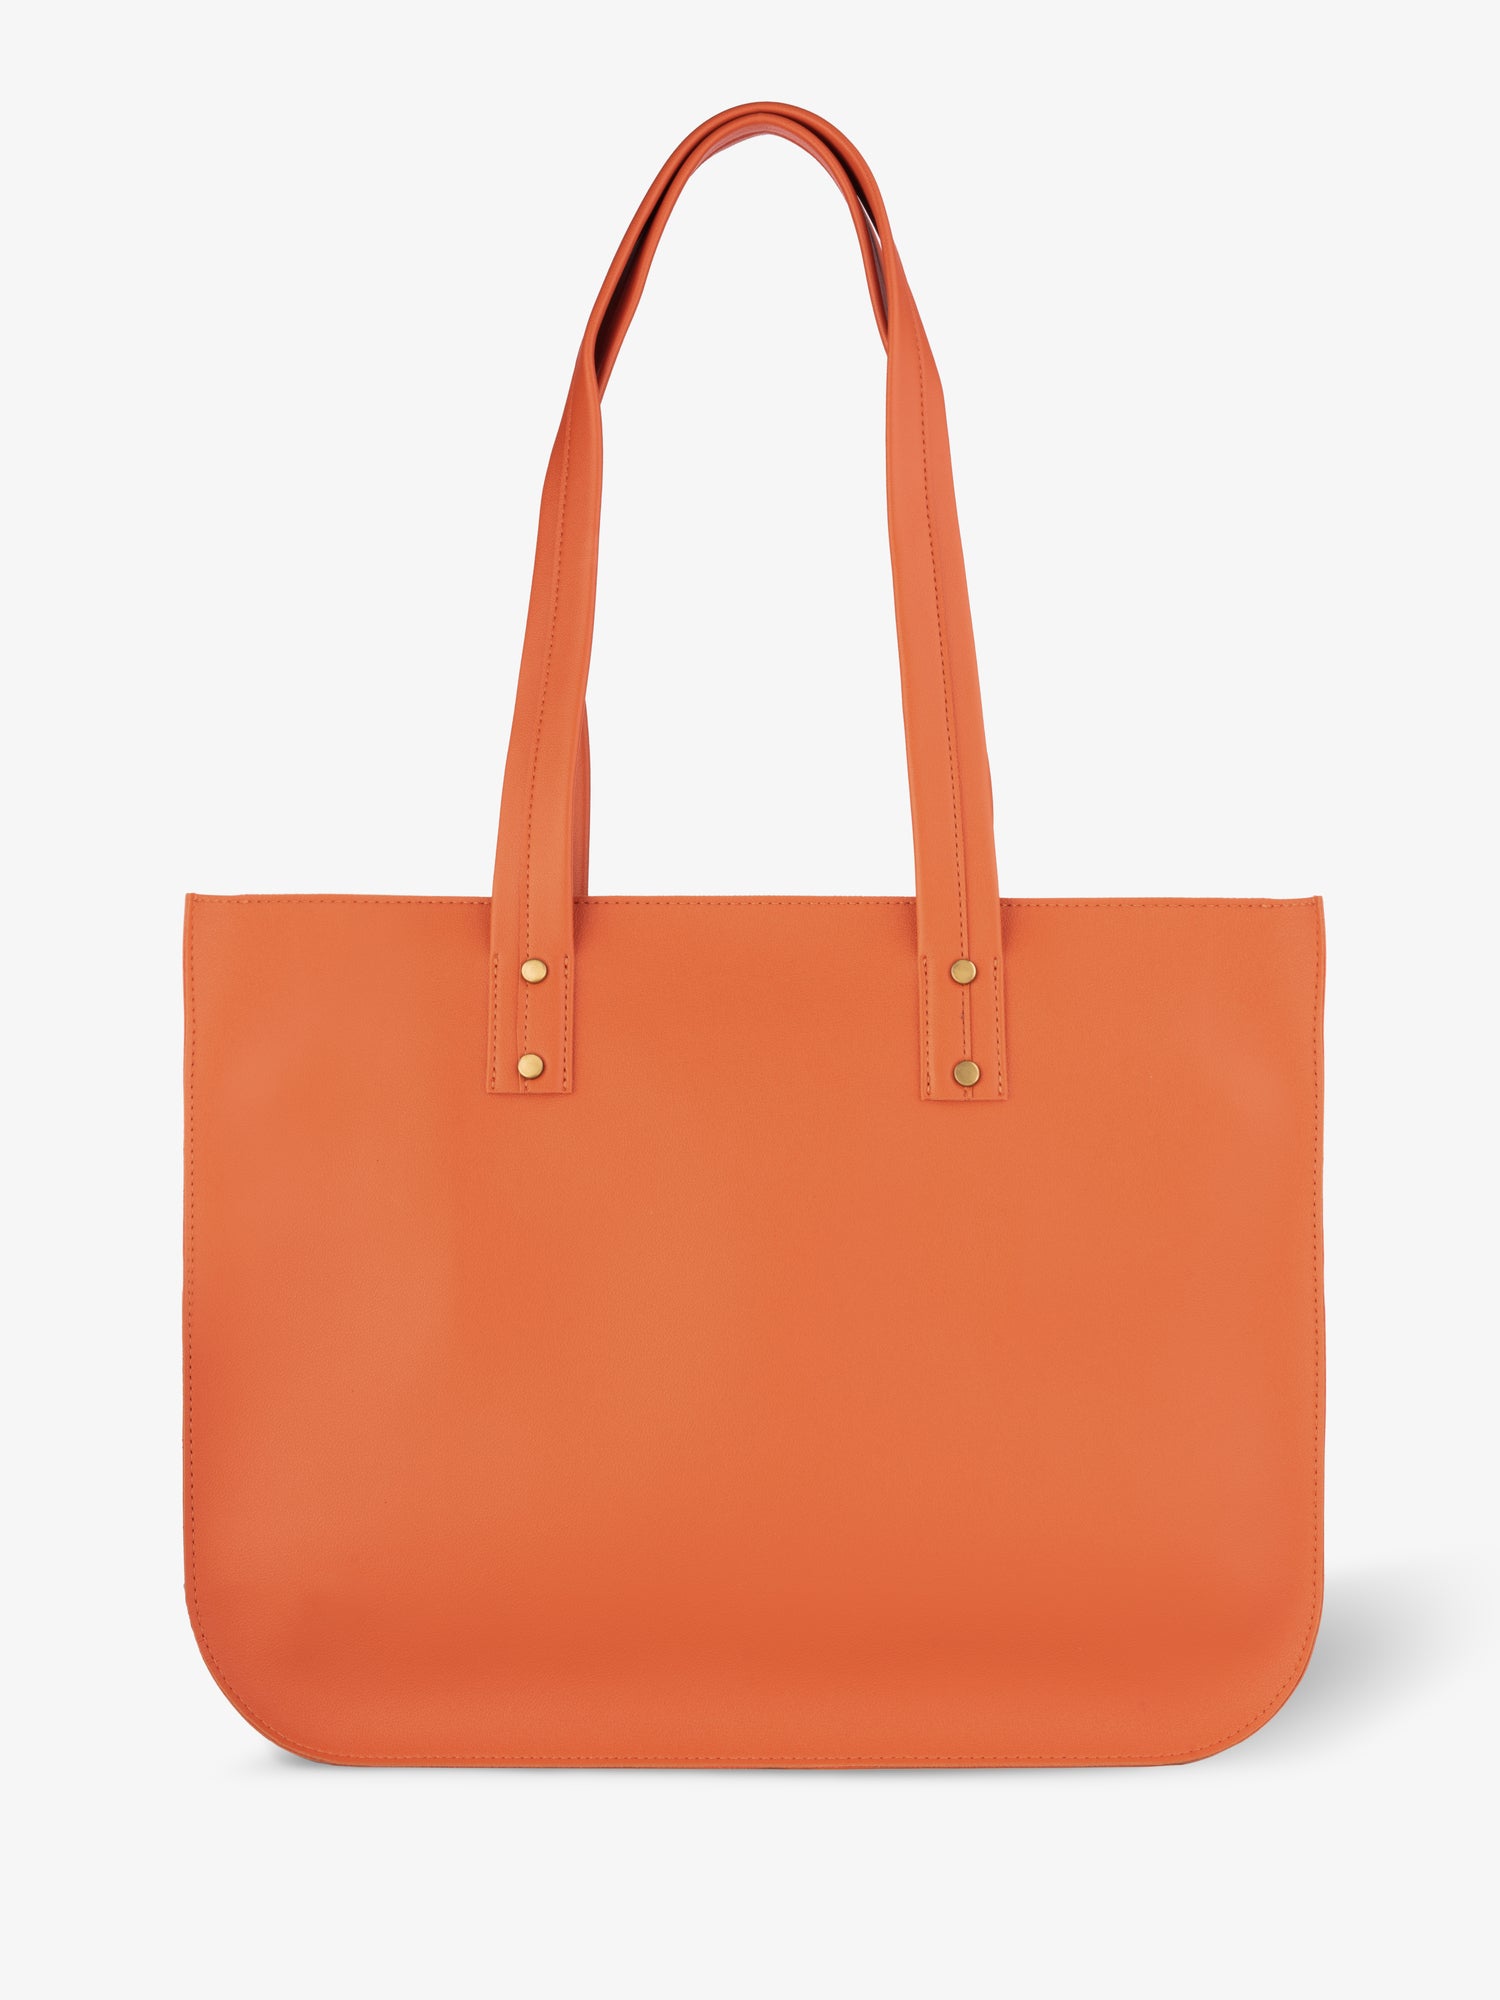 laptop tote bags for women